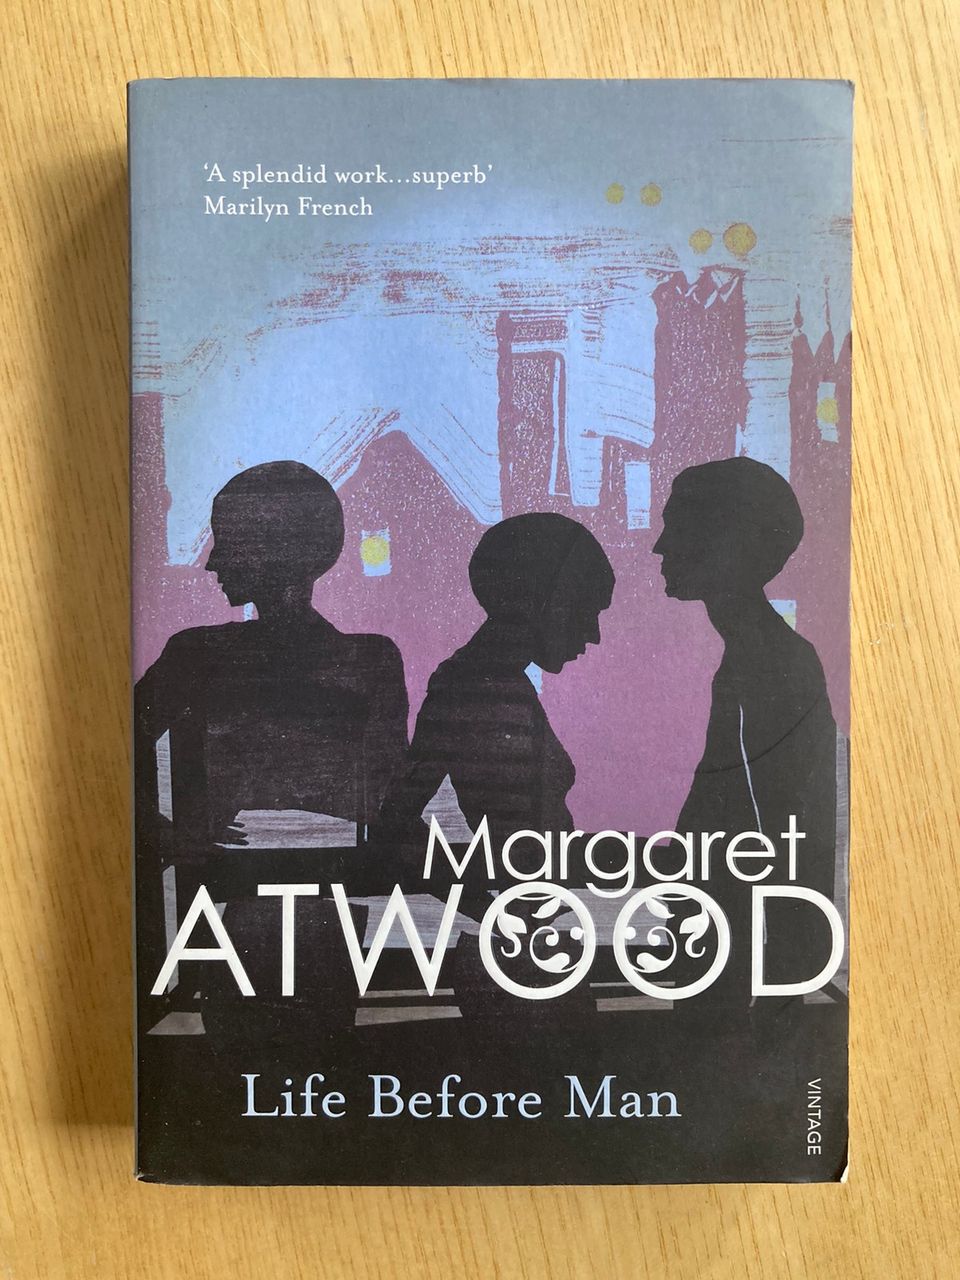 Atwood: Life before Man